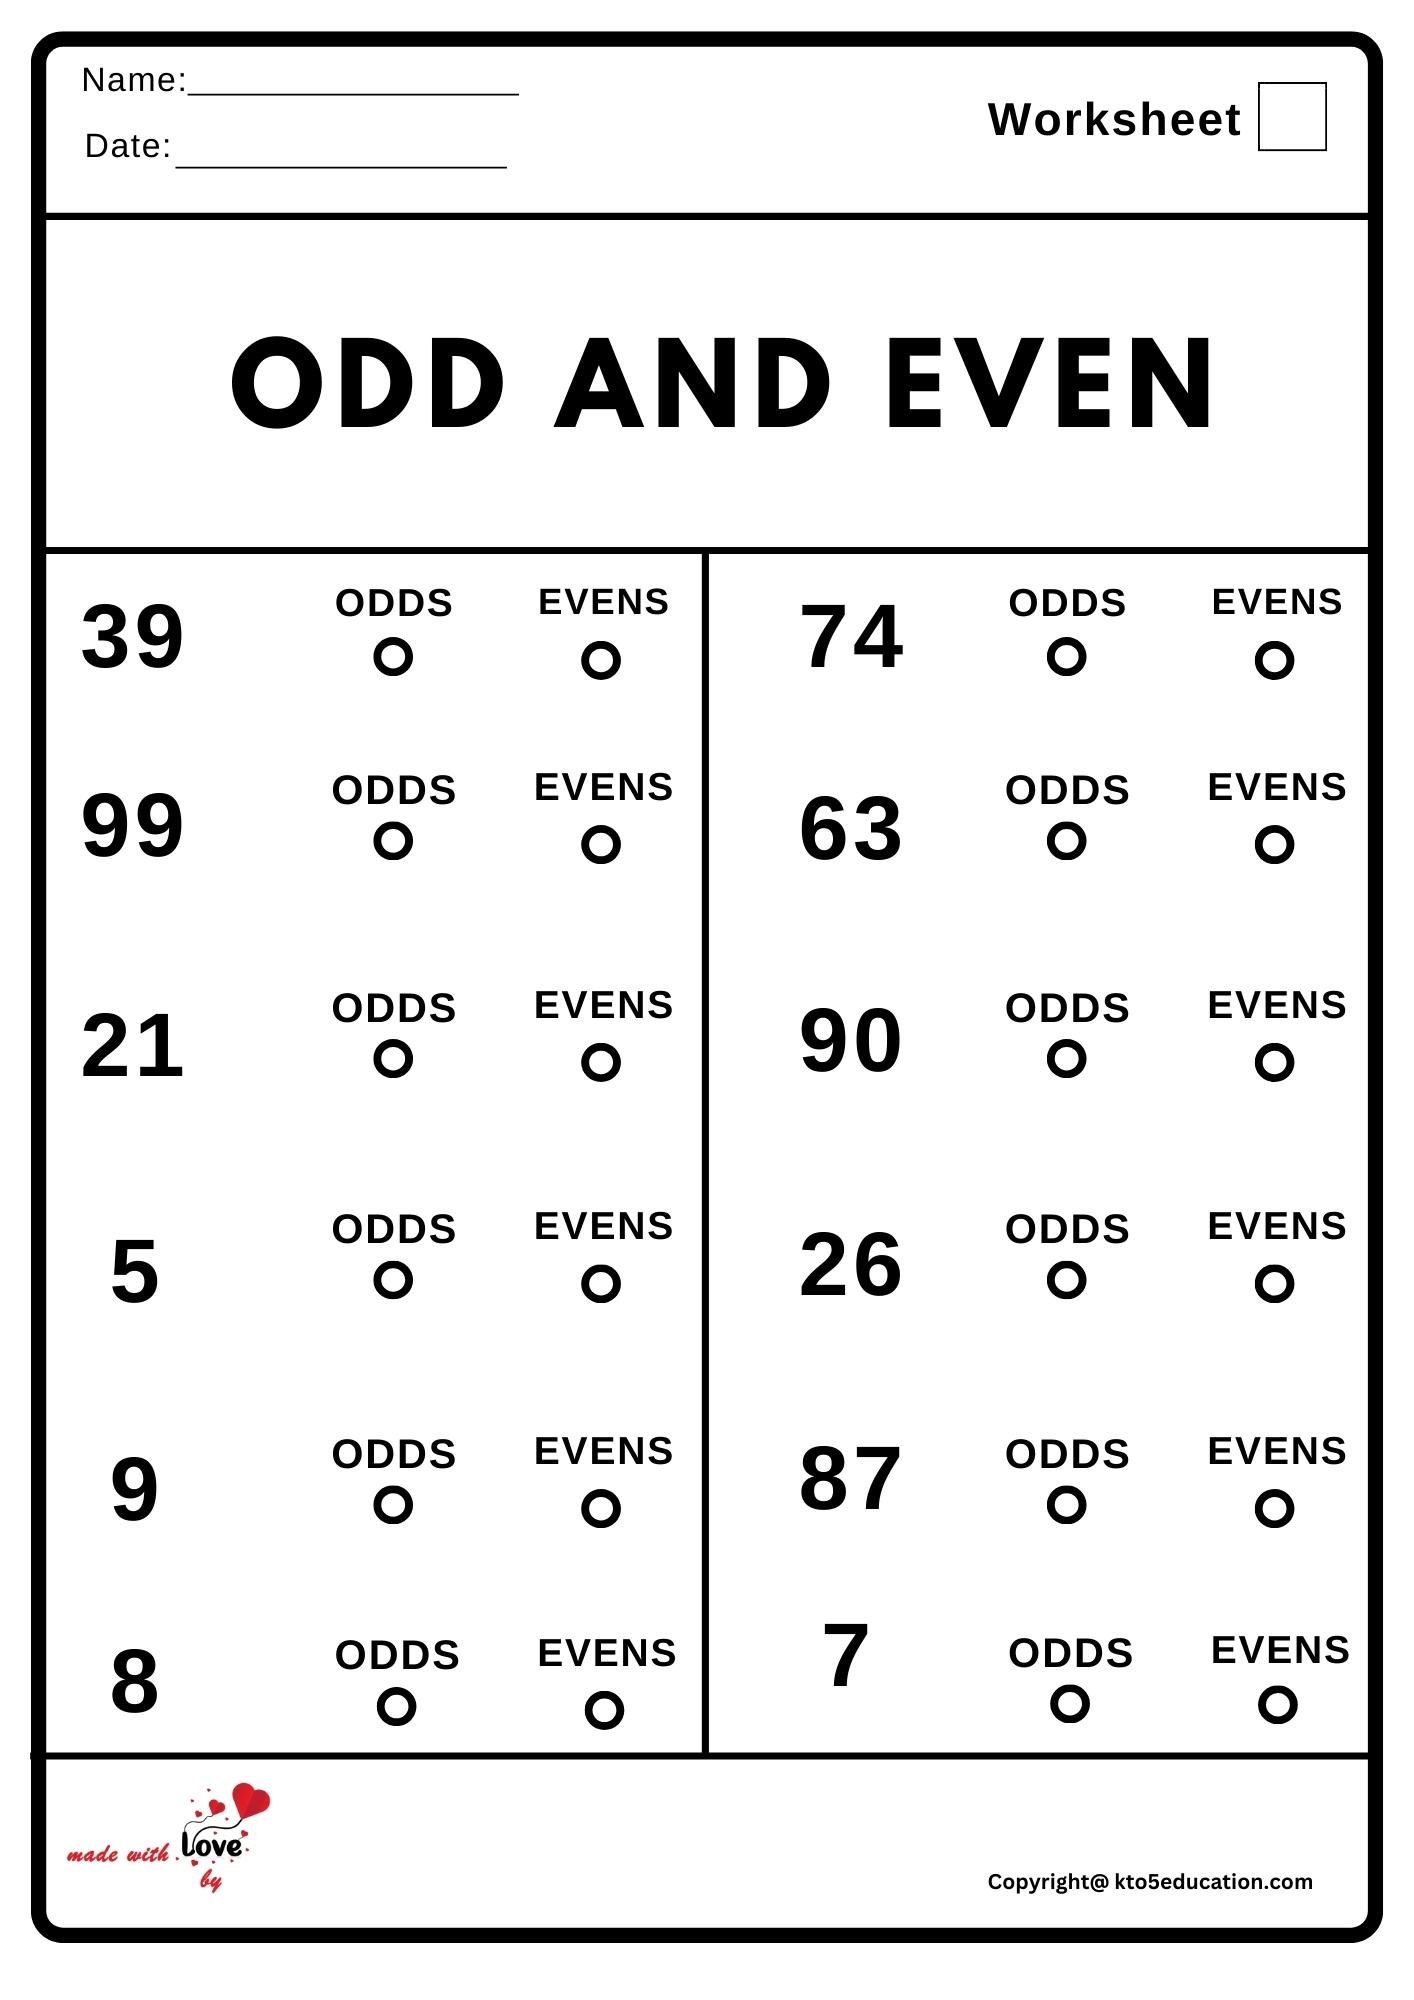 Odd And Even Worksheet